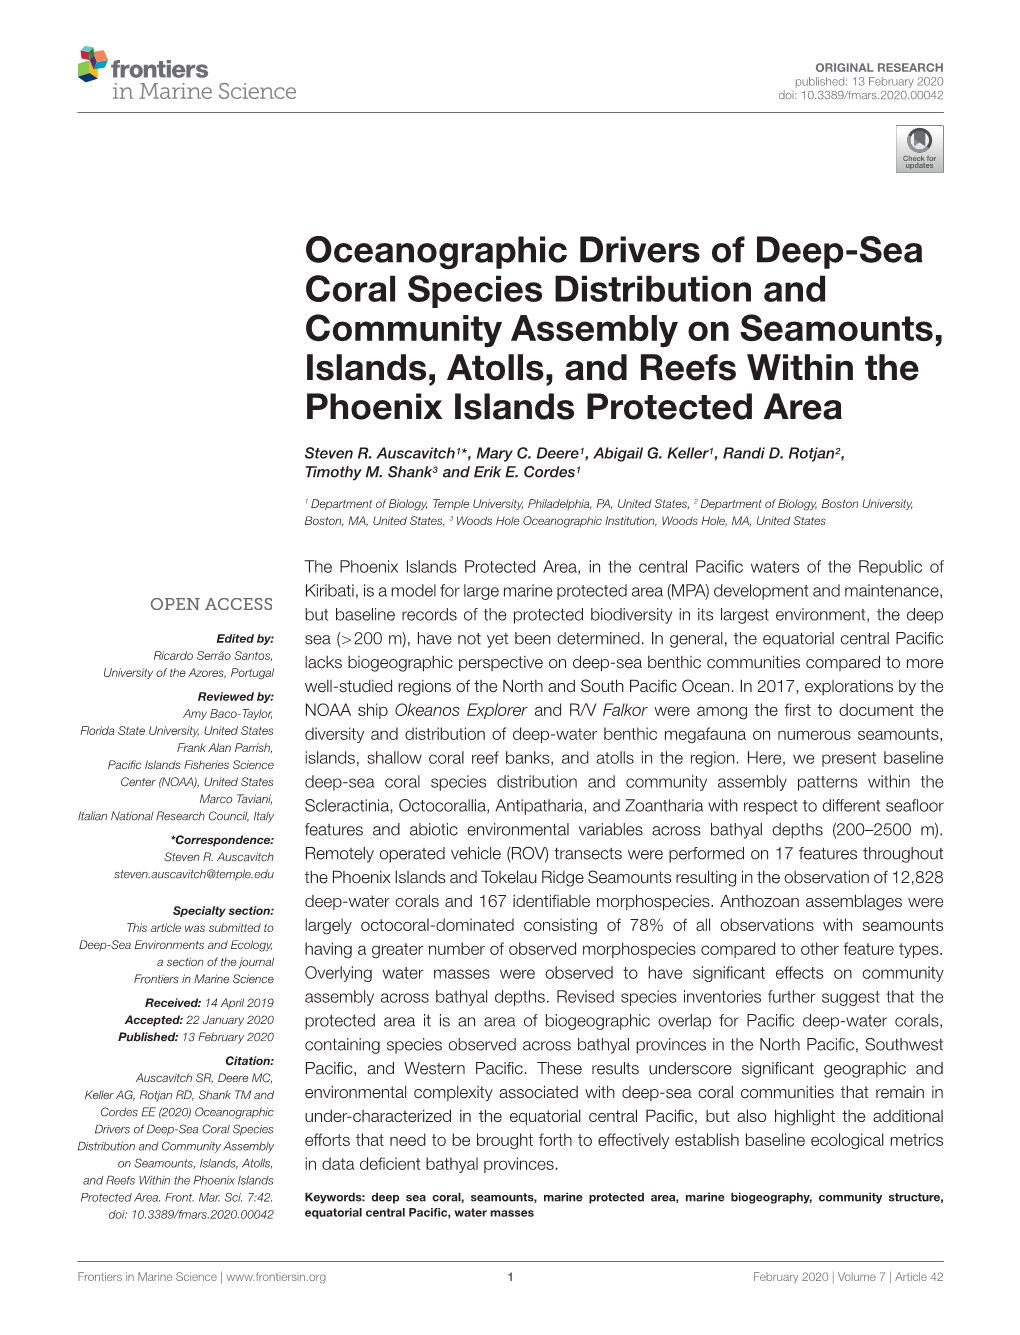 Oceanographic Drivers of Deep-Sea Coral Species Distribution and Community Assembly on Seamounts, Islands, Atolls, and Reefs Within the Phoenix Islands Protected Area